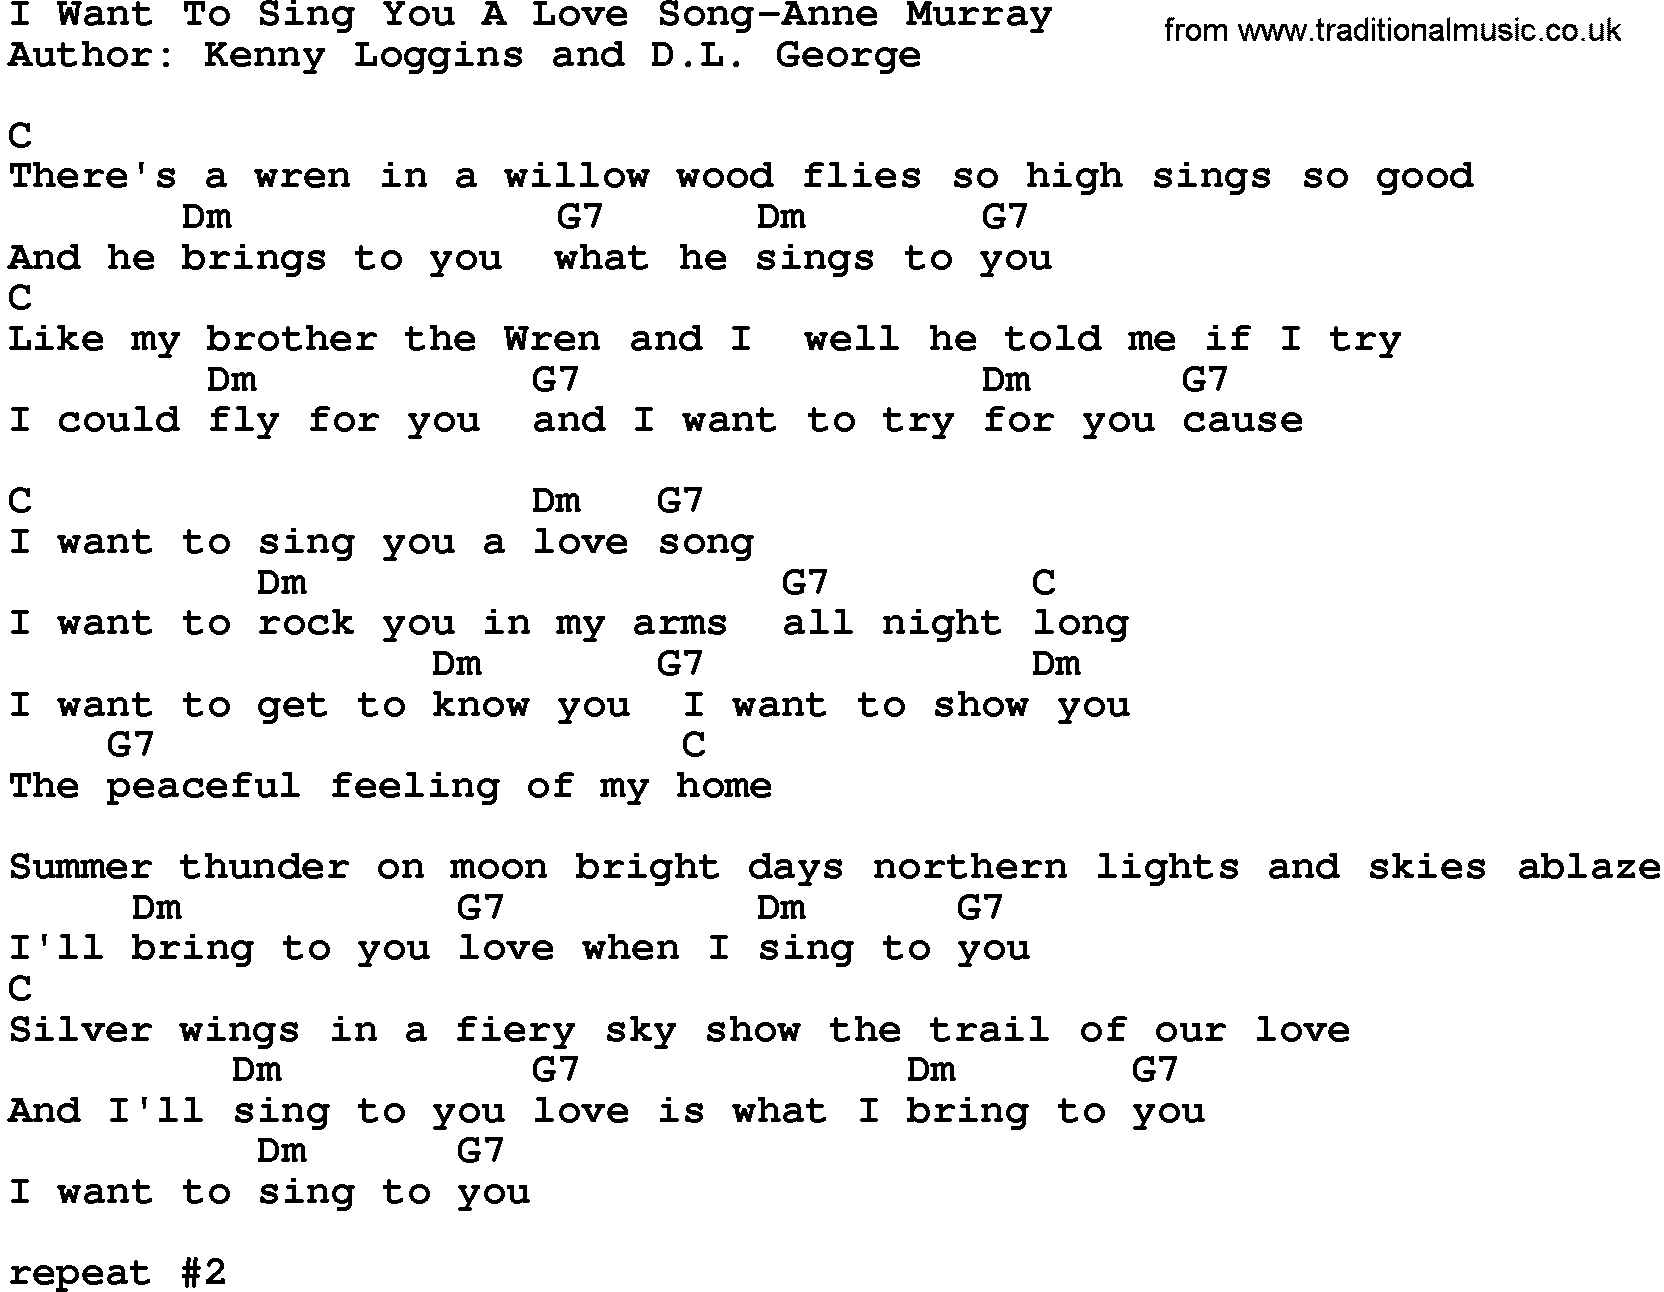 Country music song: I Want To Sing You A Love Song-Anne Murray lyrics and chords